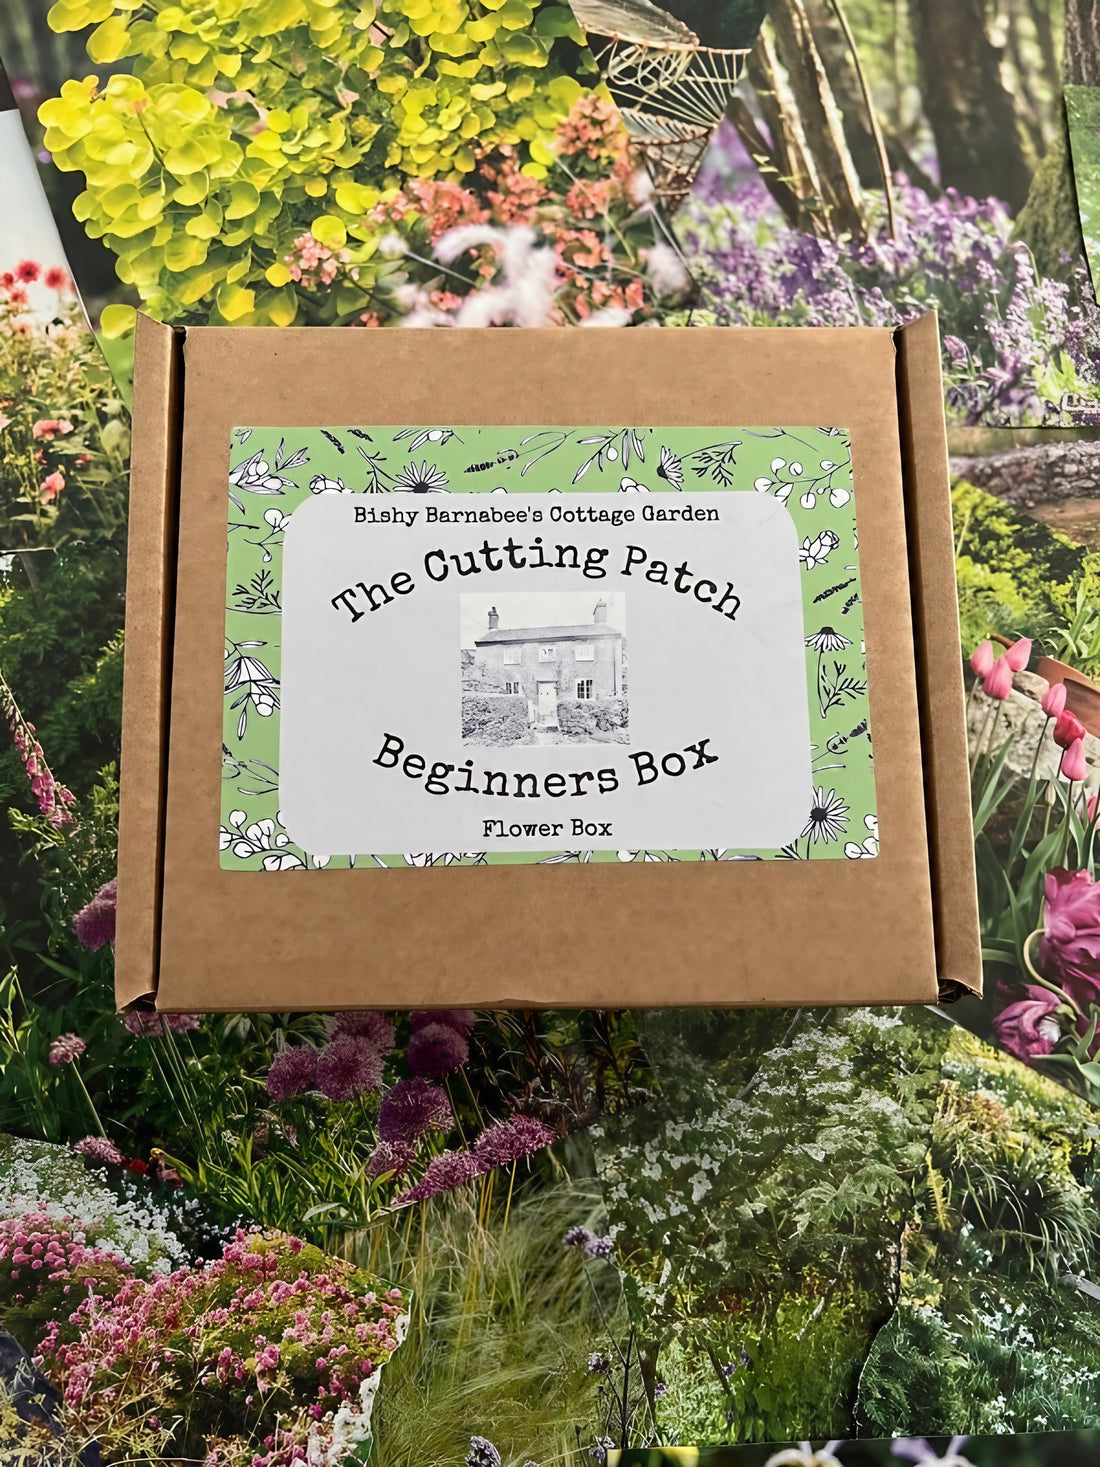 The Cutting Patch Beginners Flower Box